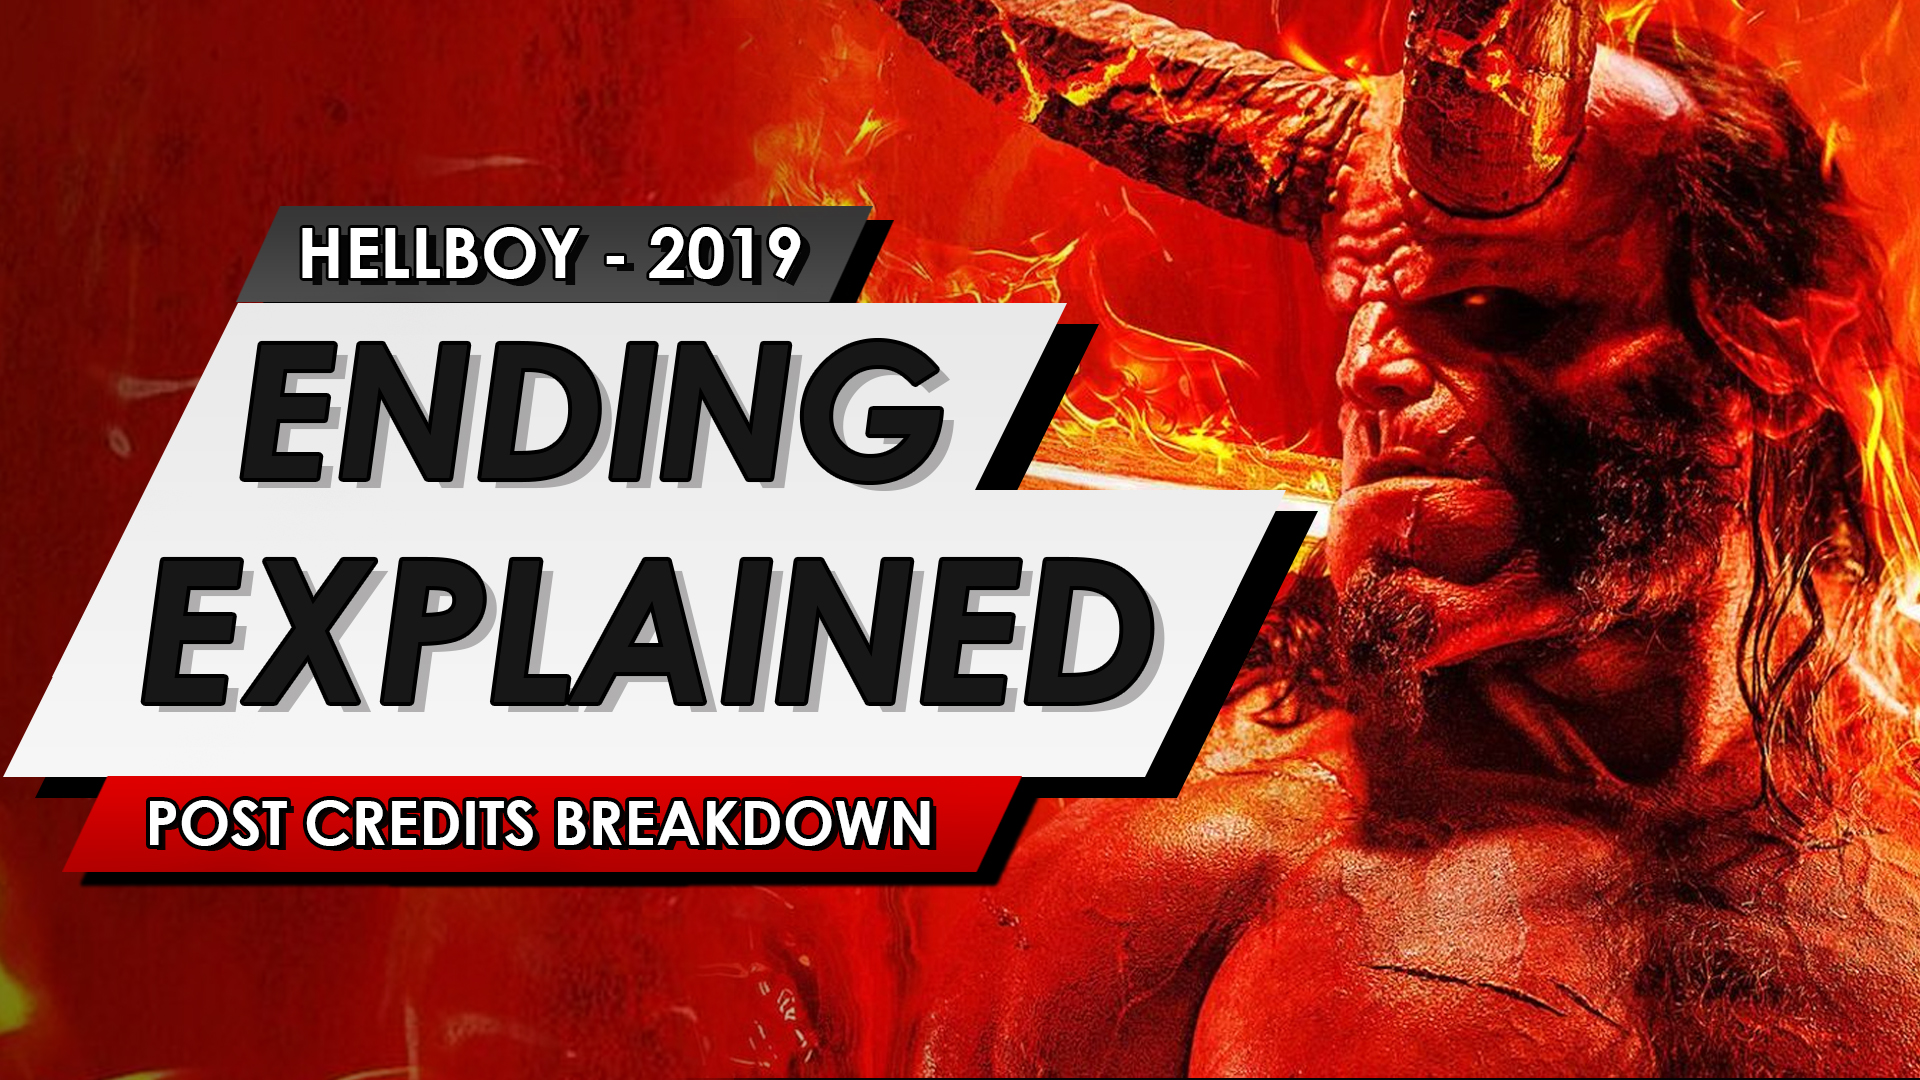 hellboy 2019 ending explained full movie post credits scene breakdown in my spoiler talk review on the reboot and sequel PREDICTION